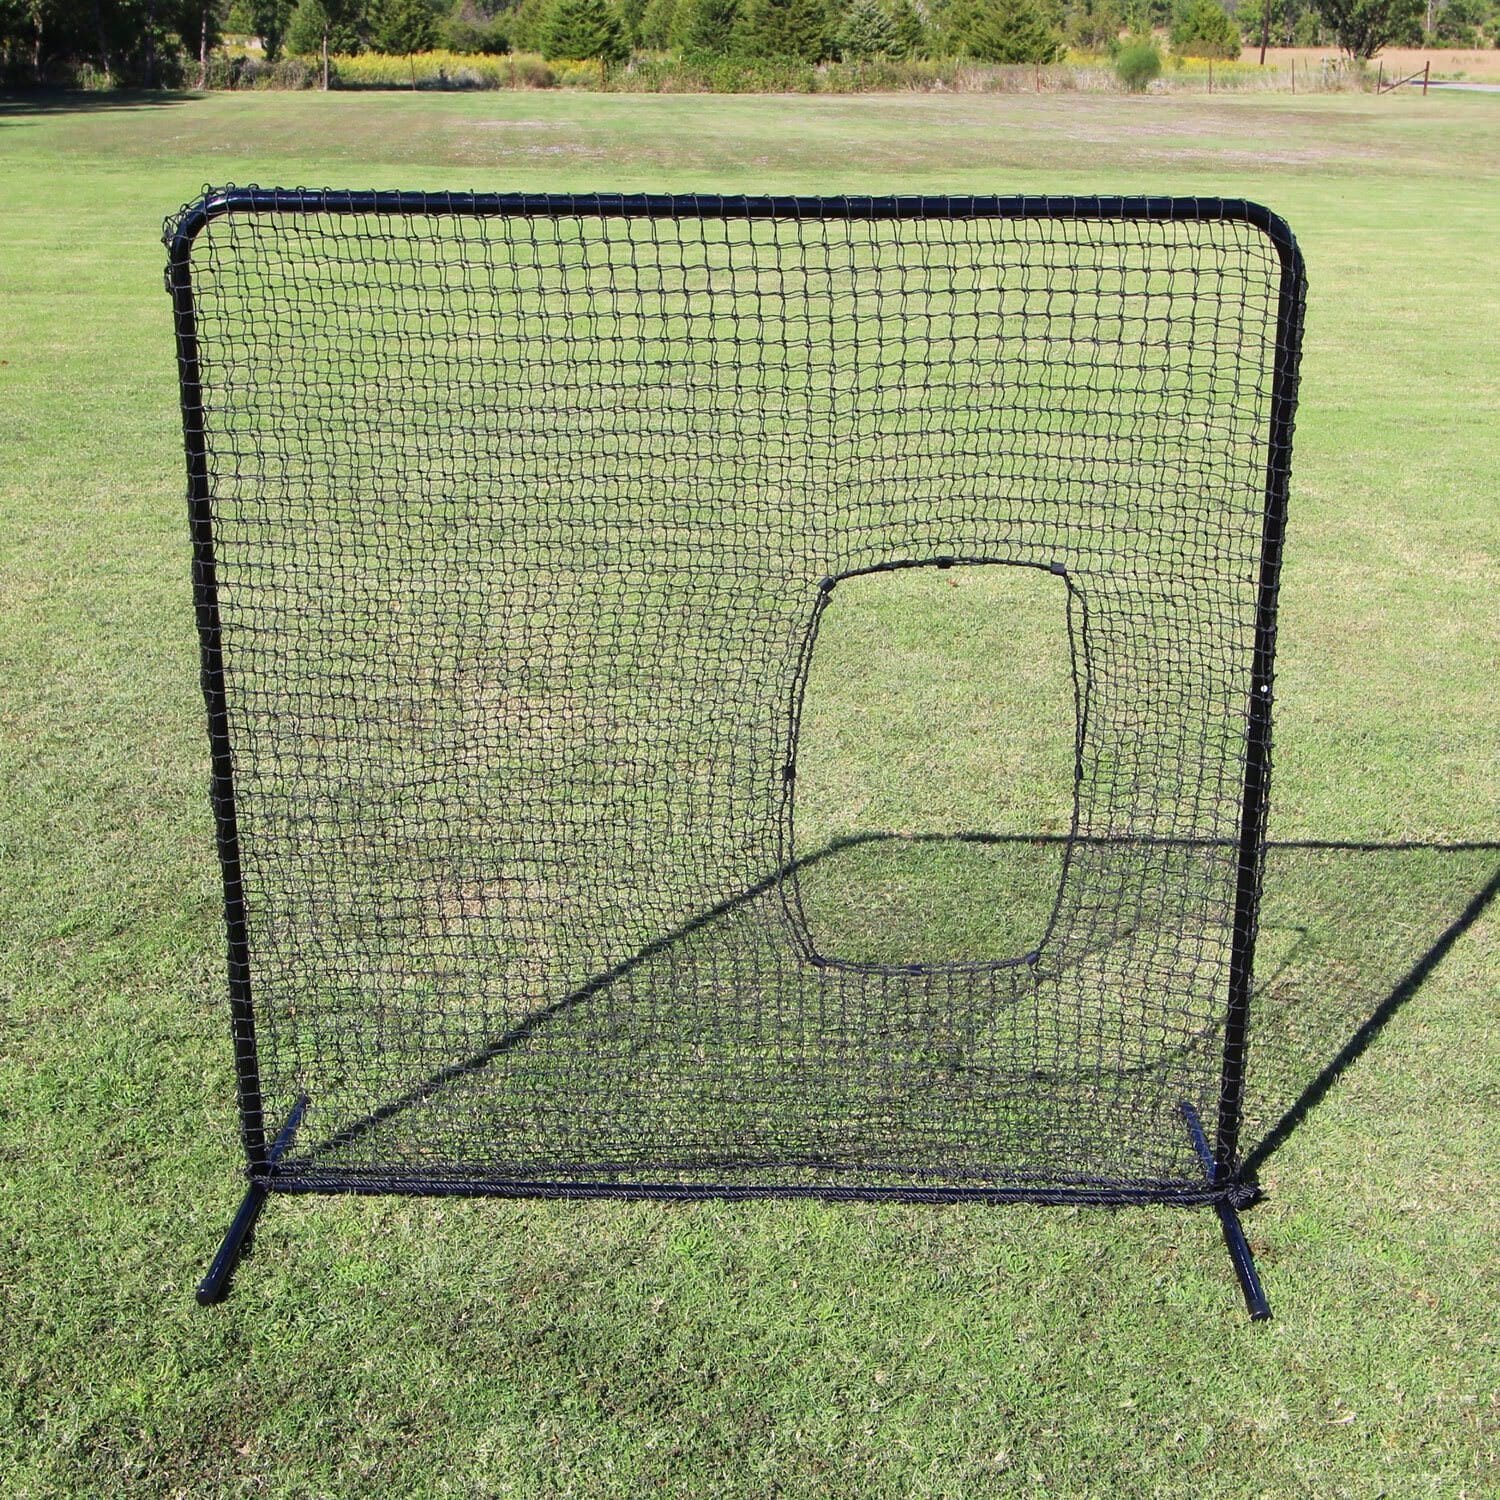 7' x 7' Softball Screen front view